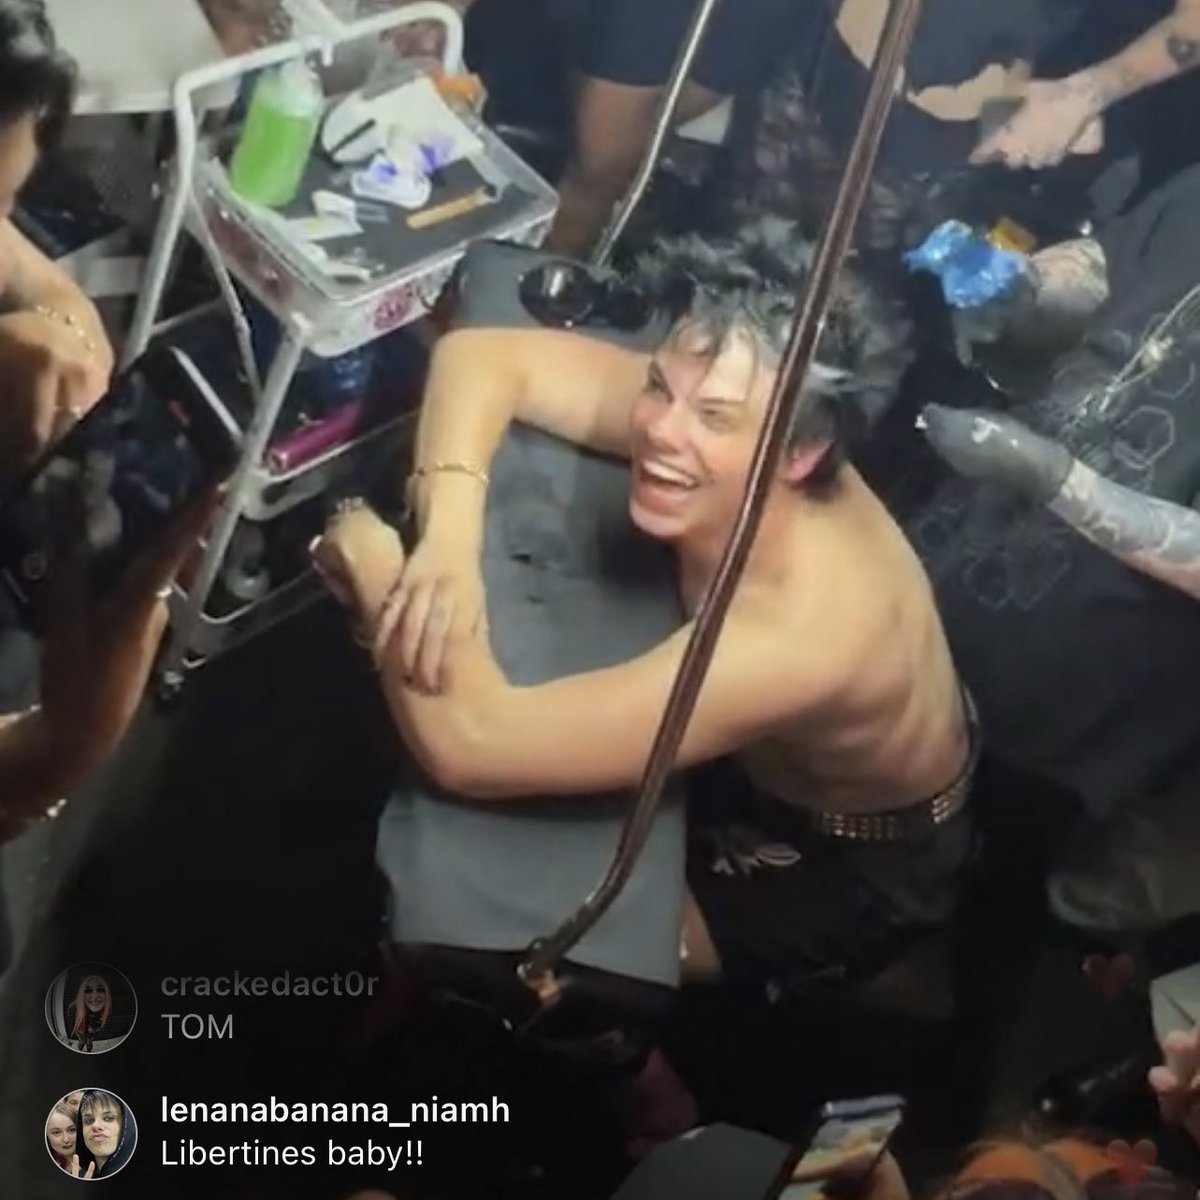 rare aesthetic- fans watching yungblud get tattooed in a london pub